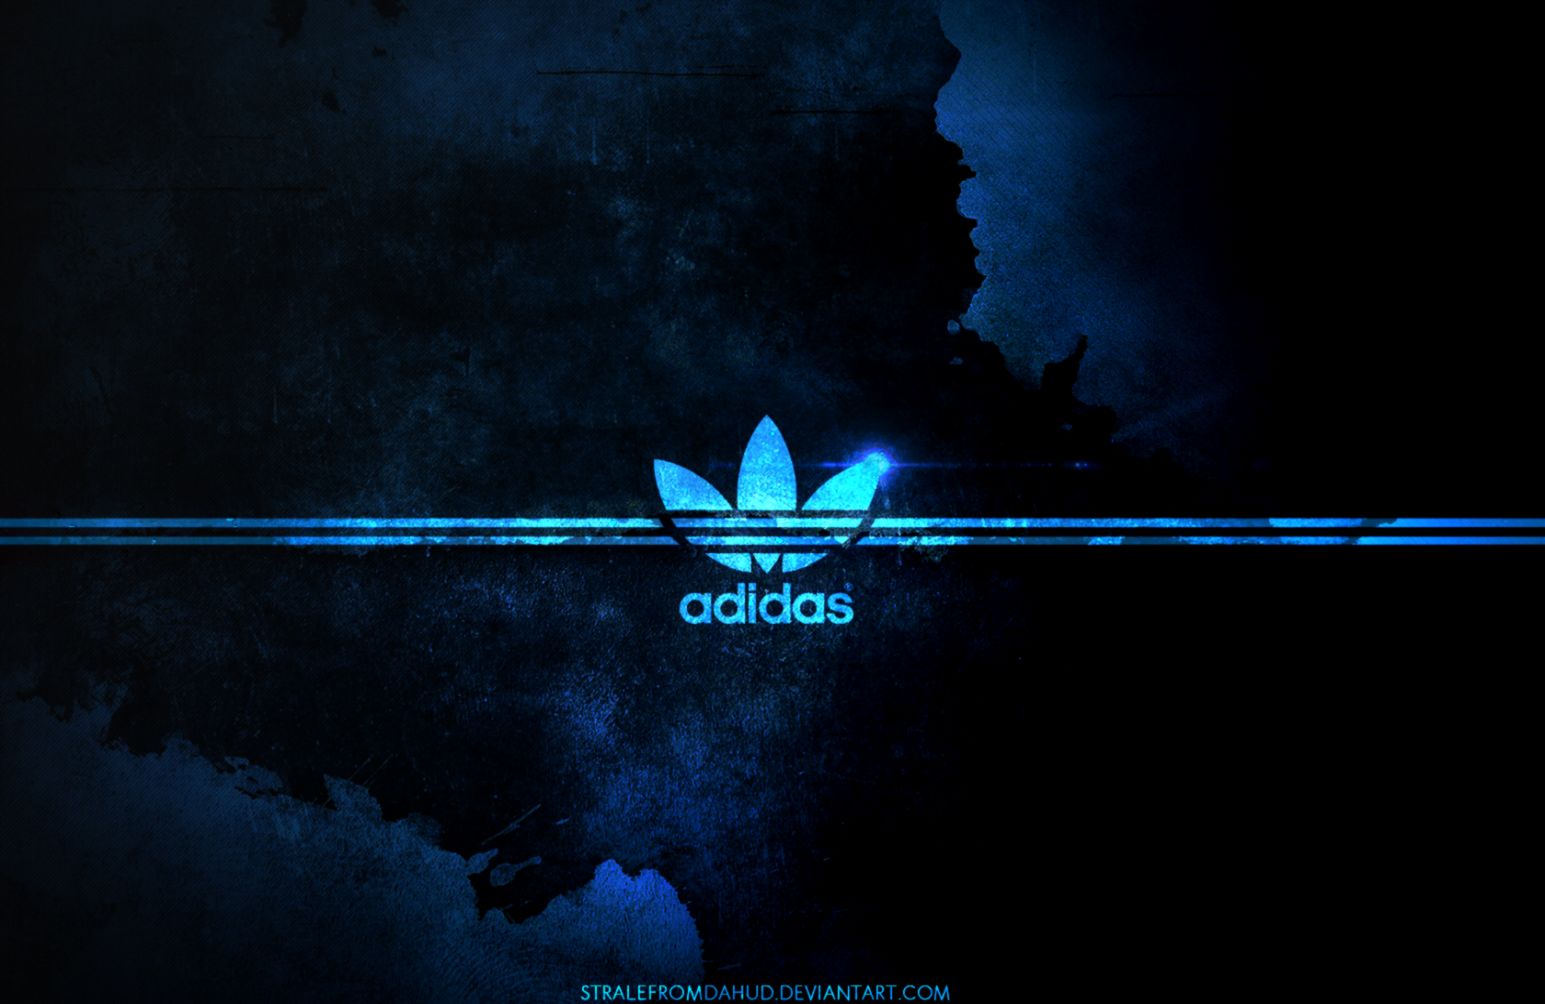 adidas logo with cool background